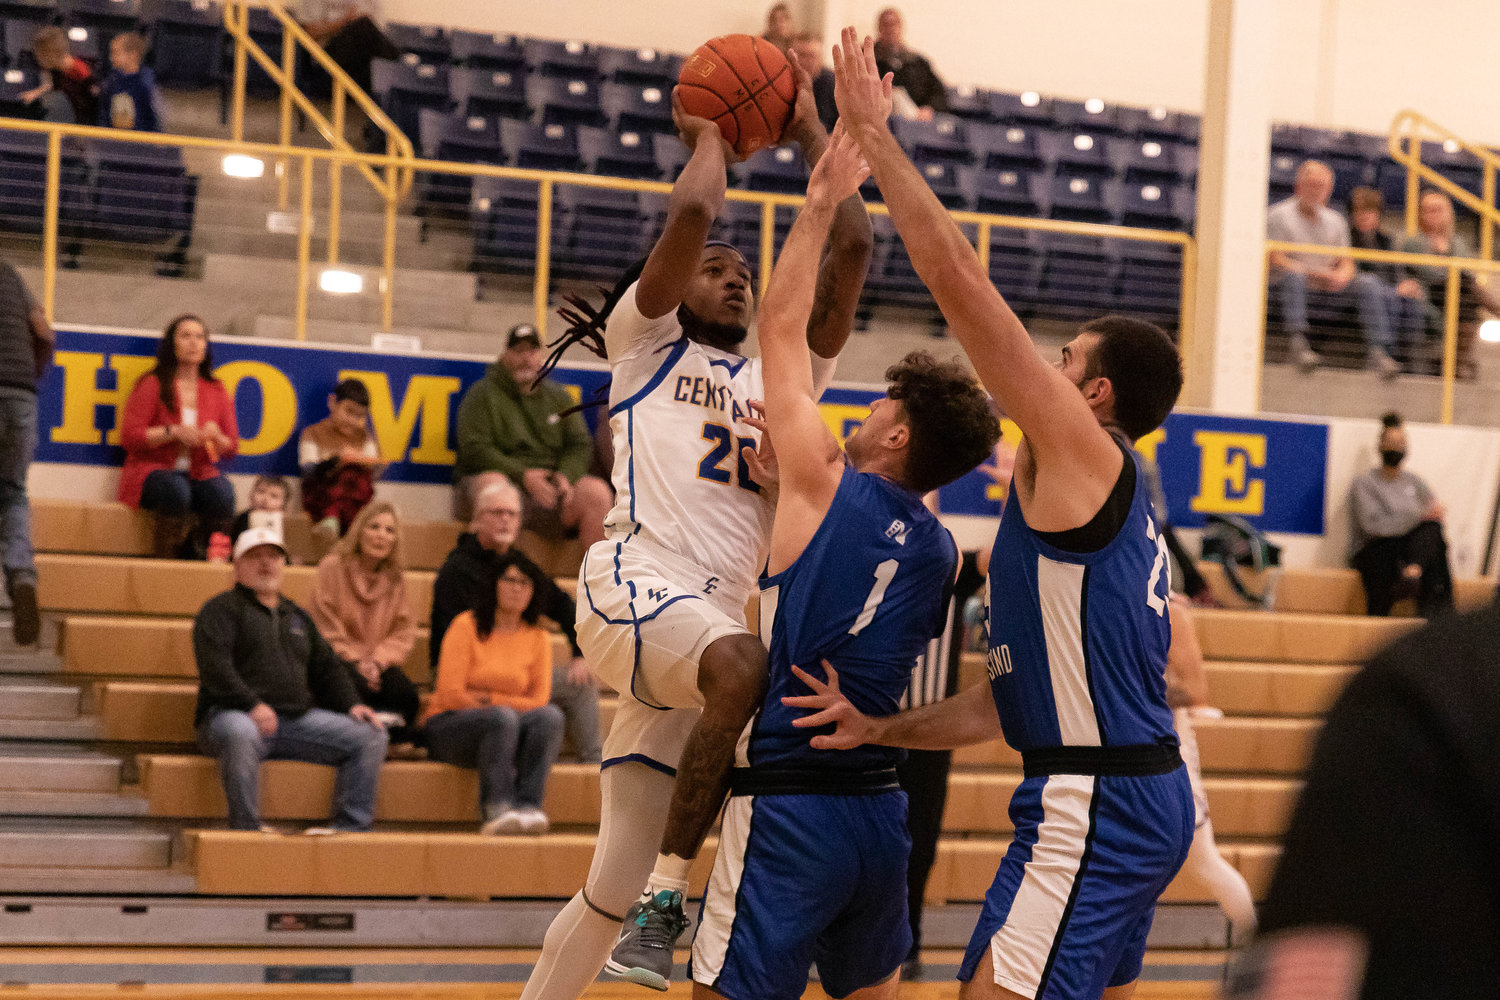 Centralia College guard Raymond Guillory takes a contested shot against South Puget Sound Jan. 14 at Michael Smith Gym.